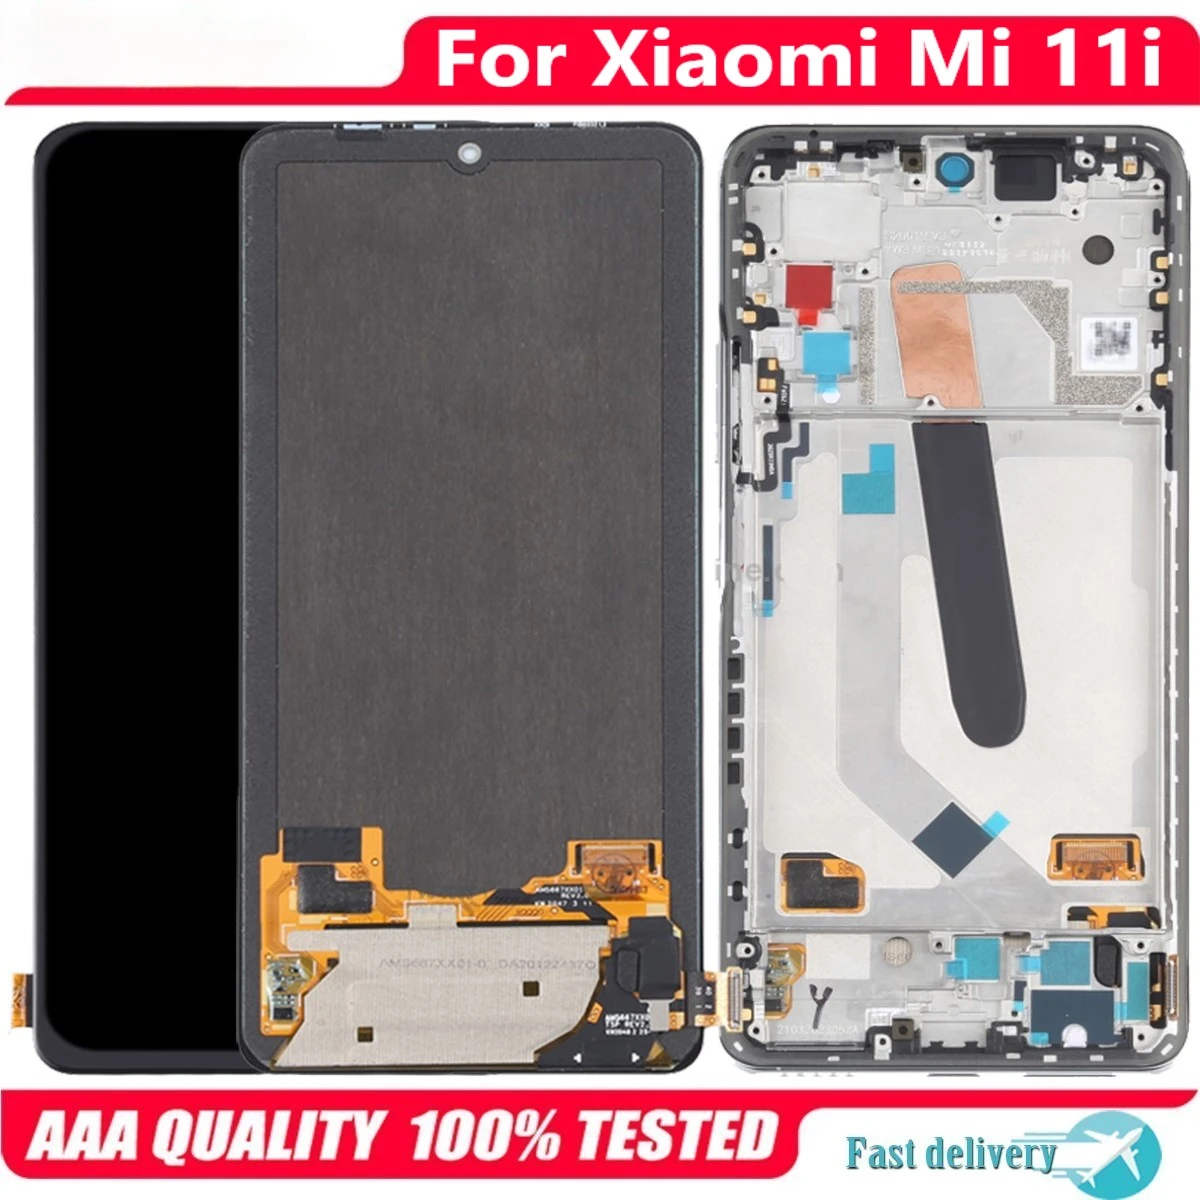 

6.67'' Original AMOLED For Xiaomi Mi 11i Mi11i M2012K11G LCD Display Touch Screen Replacement Digitizer Assembly